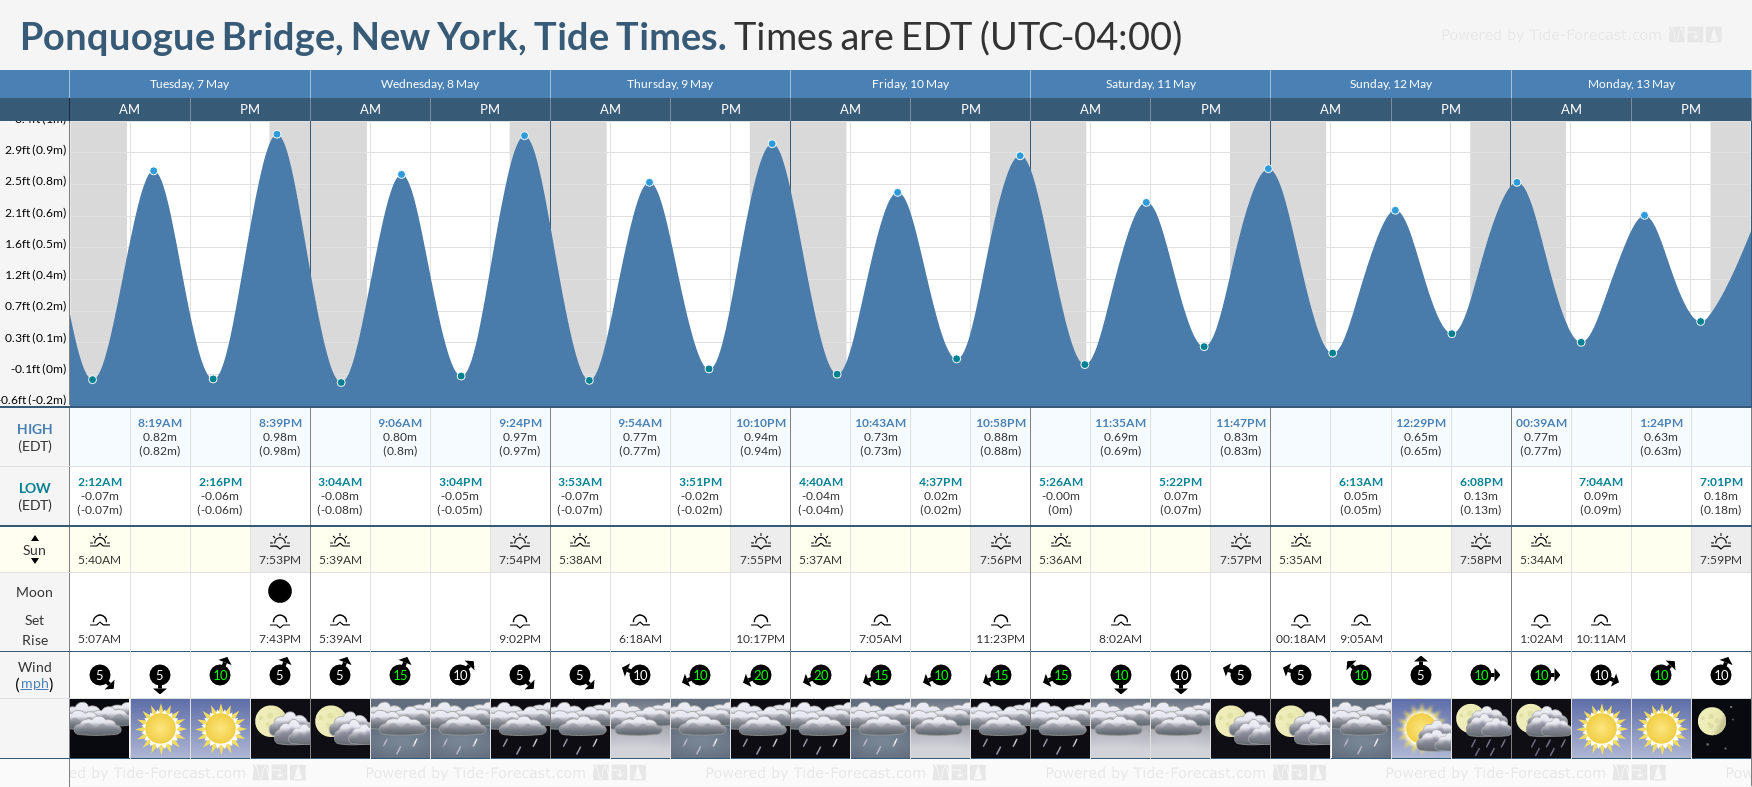 Ponquogue Bridge, New York Tide Chart including high and low tide tide times for the next 7 days